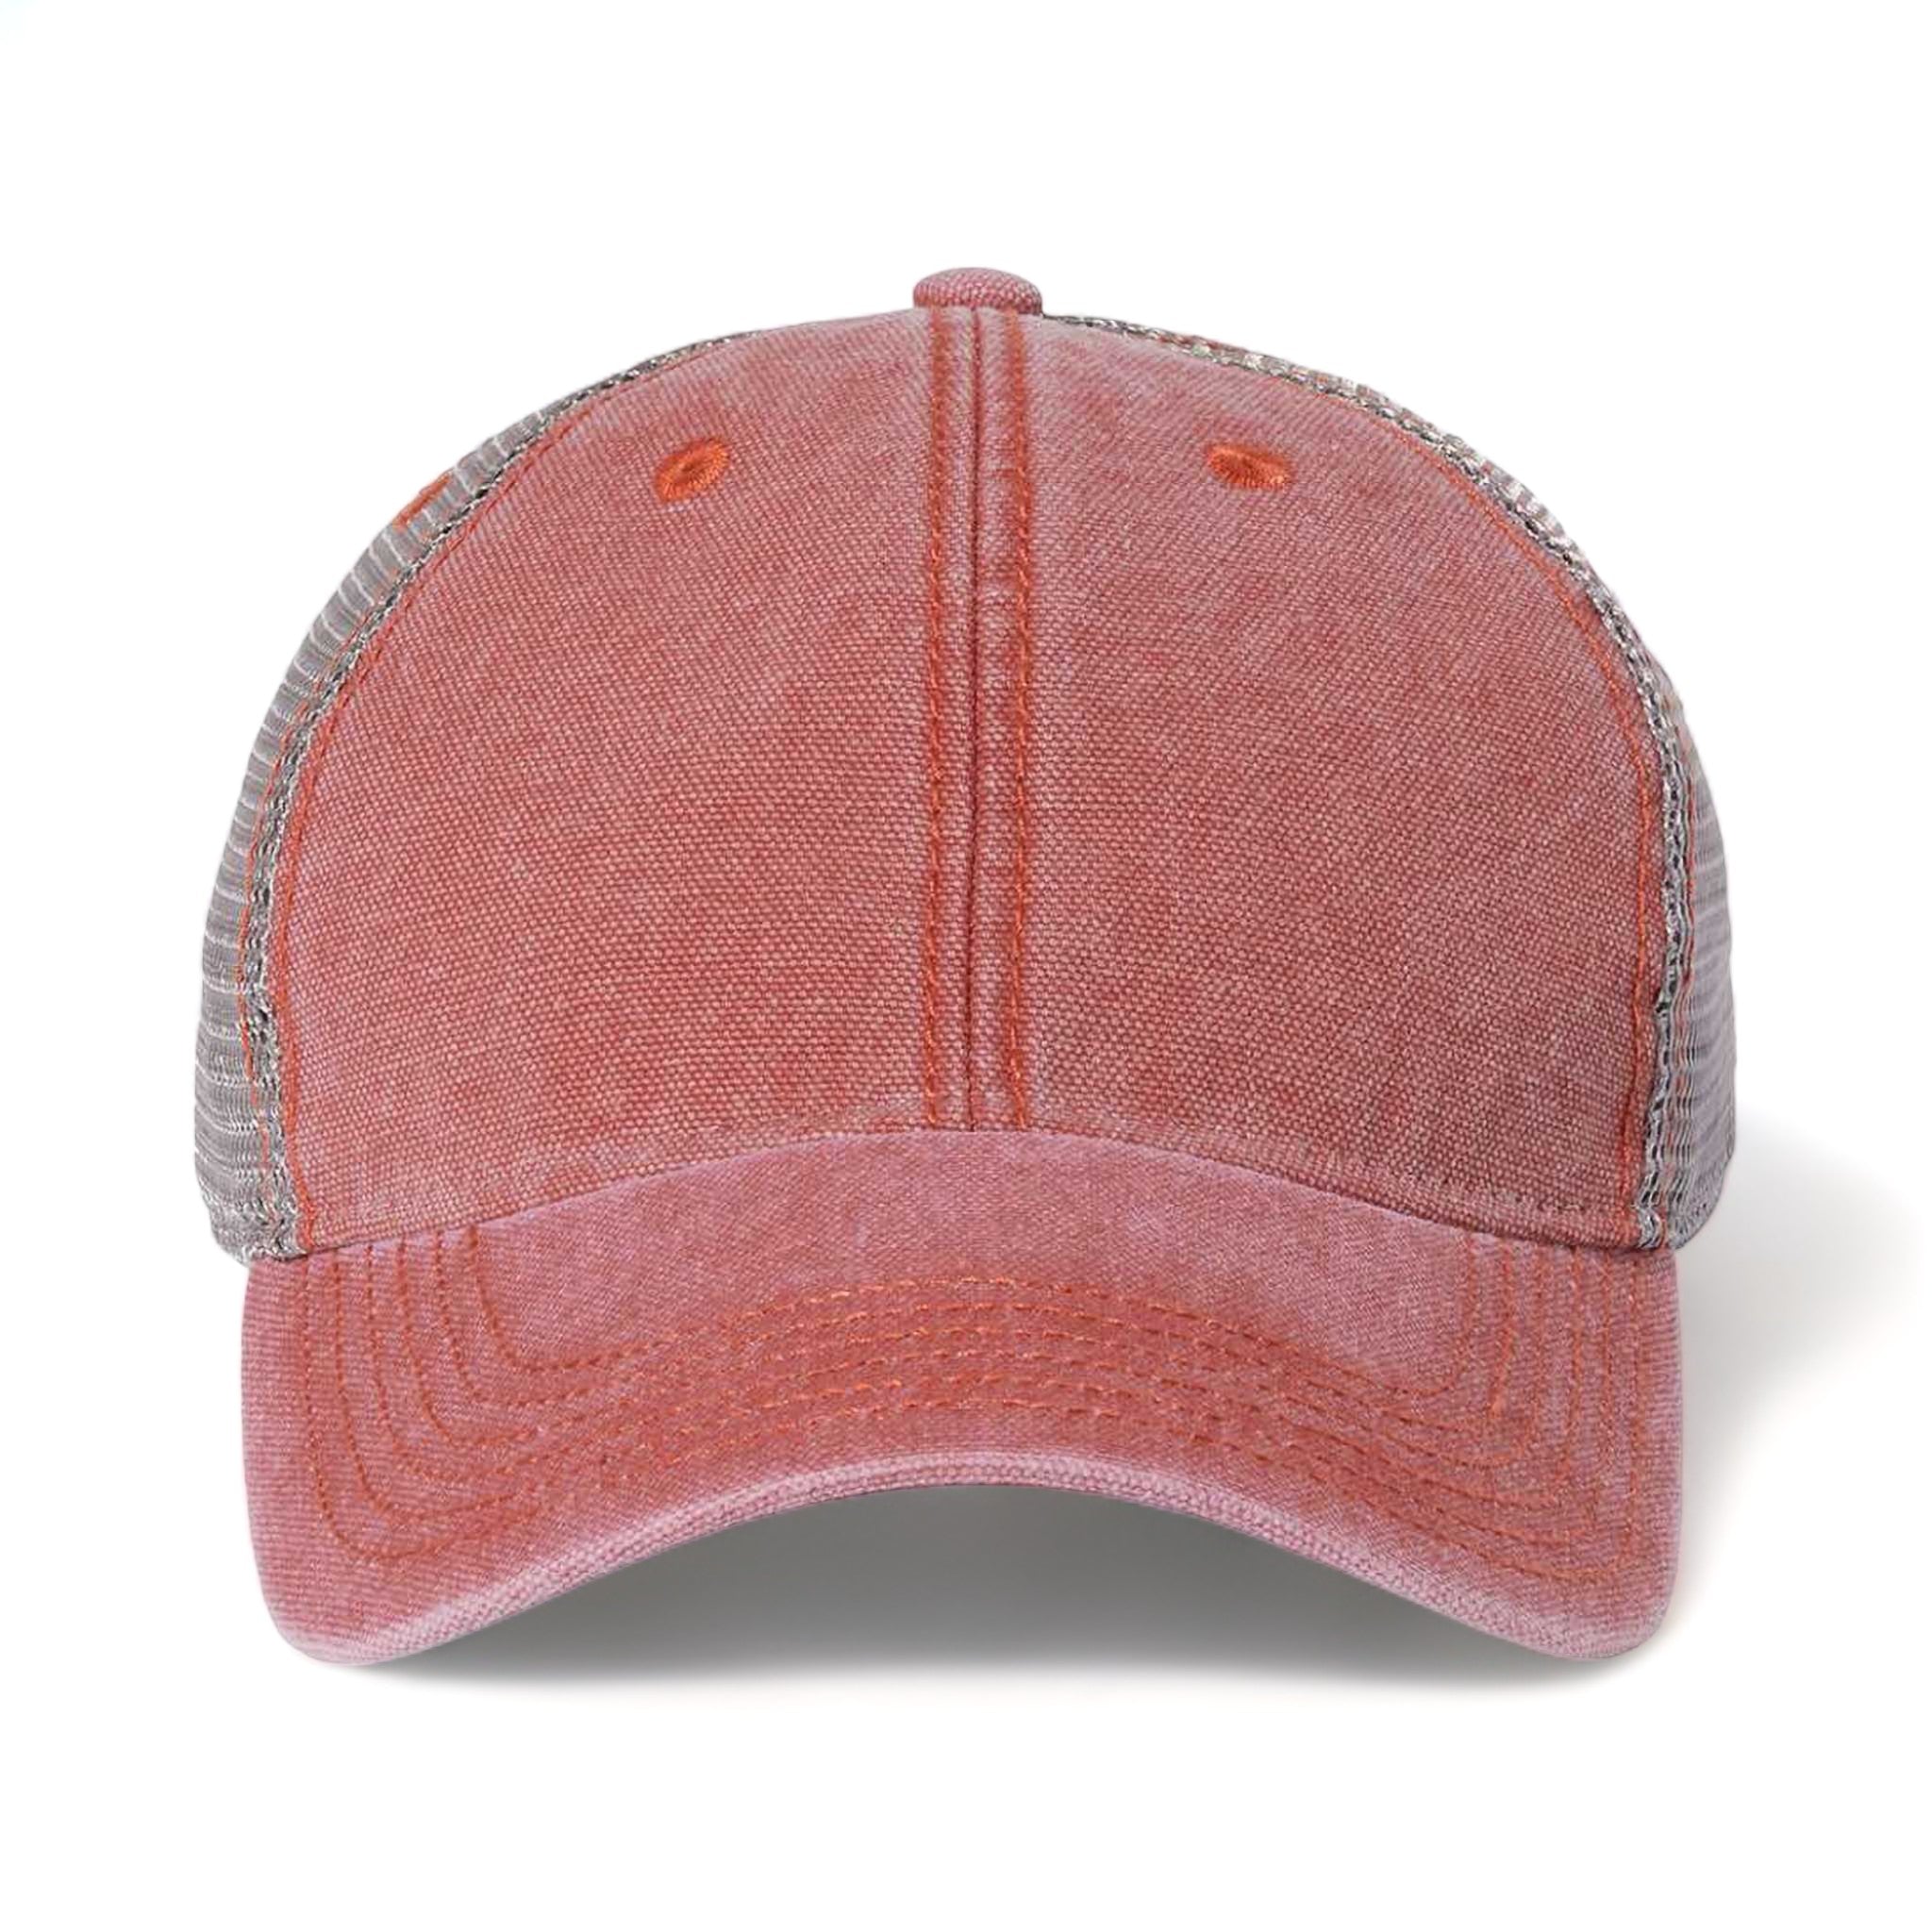 Front view of LEGACY DTA custom hat in nantucket red and grey